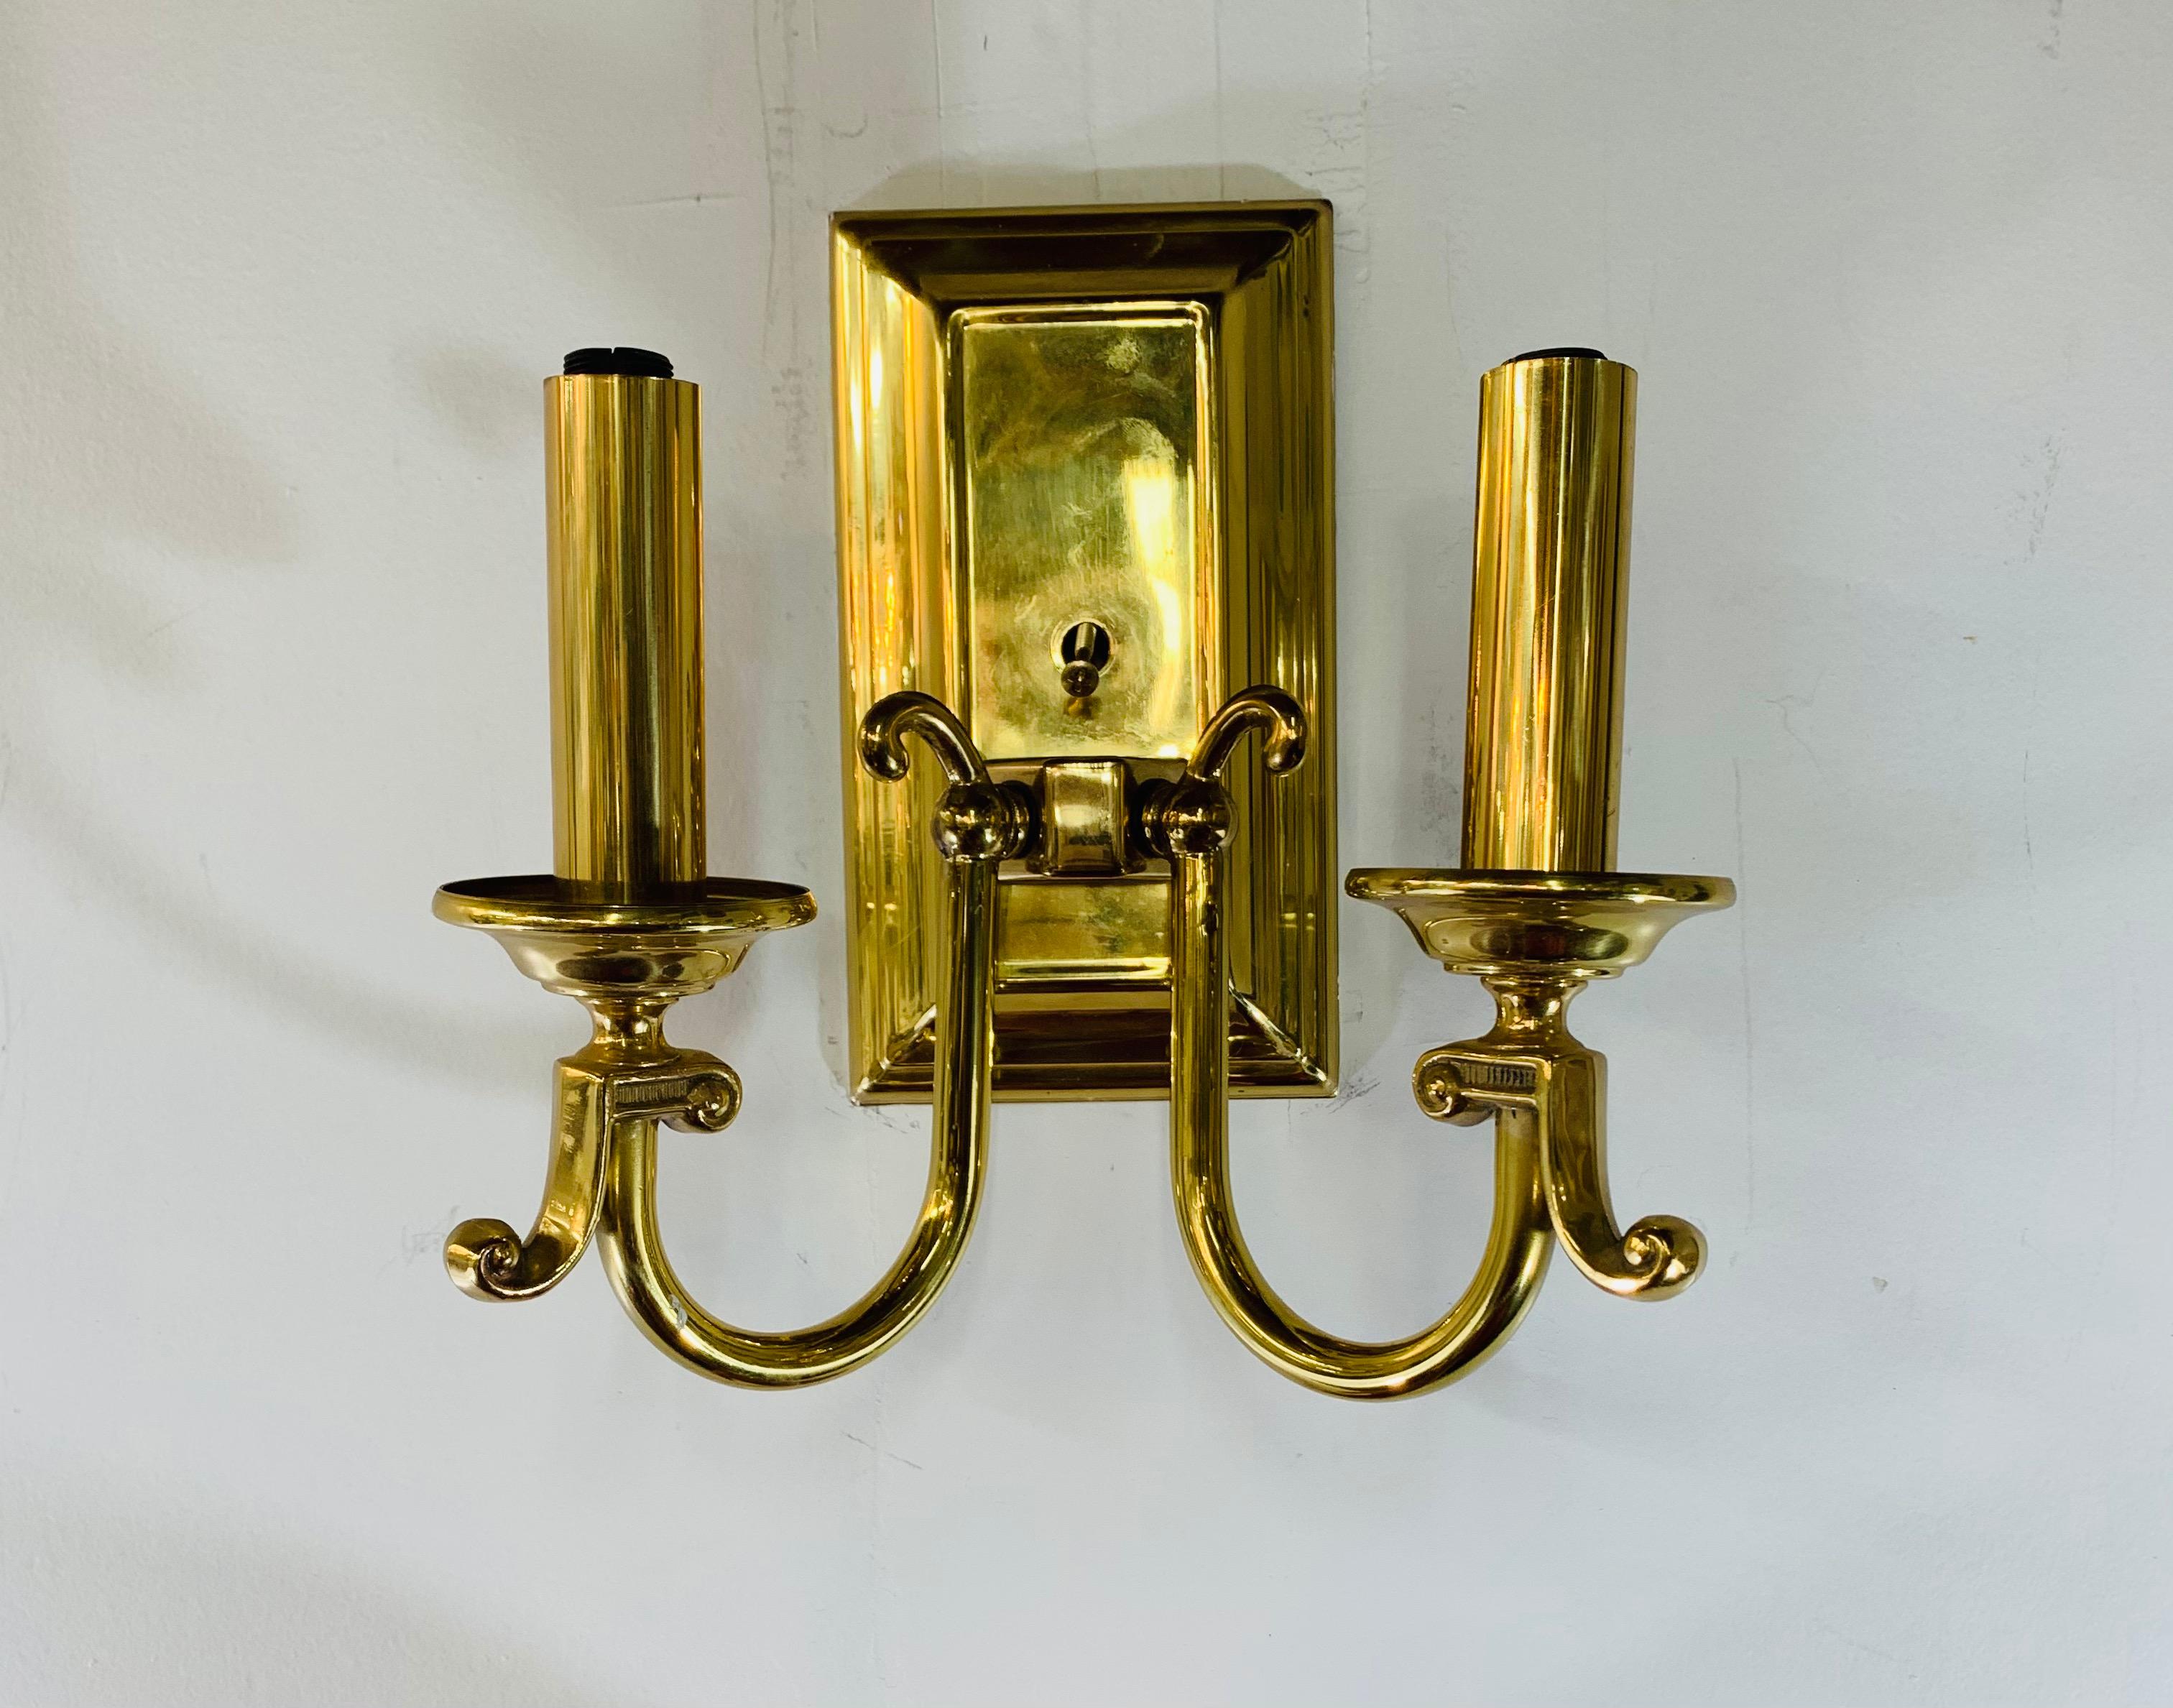 A quality and fashionable set of four brass American Federal style wall sconces. Each sconce featuring two candelabras arms ending with a scroll.

A delightful set to decorate and add light to your hallway or staircase or any room.